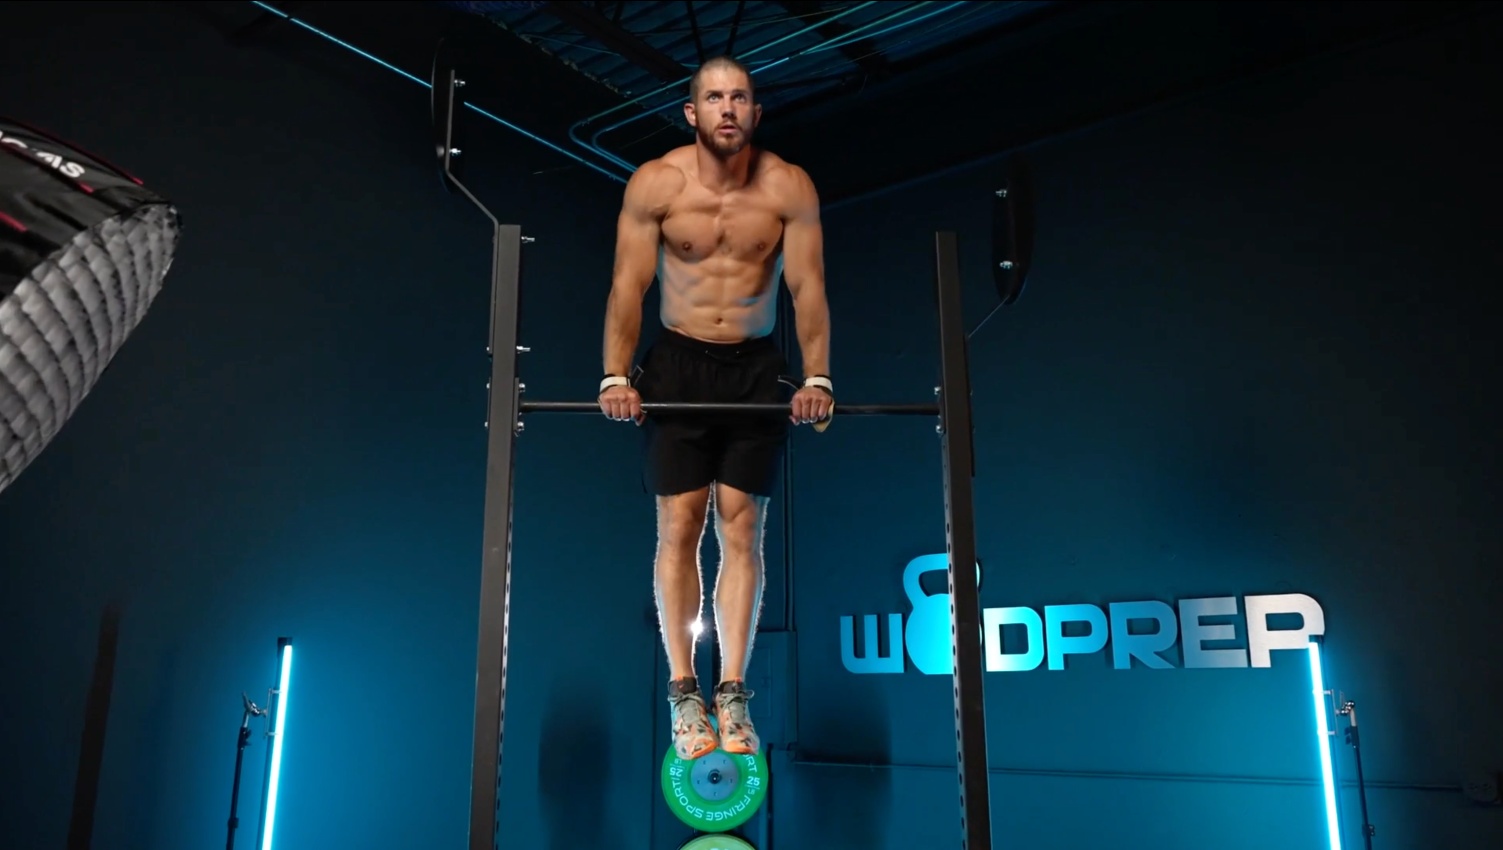 Top CrossFit Workouts to Practice Before The Open: Strategy and Technique Tips